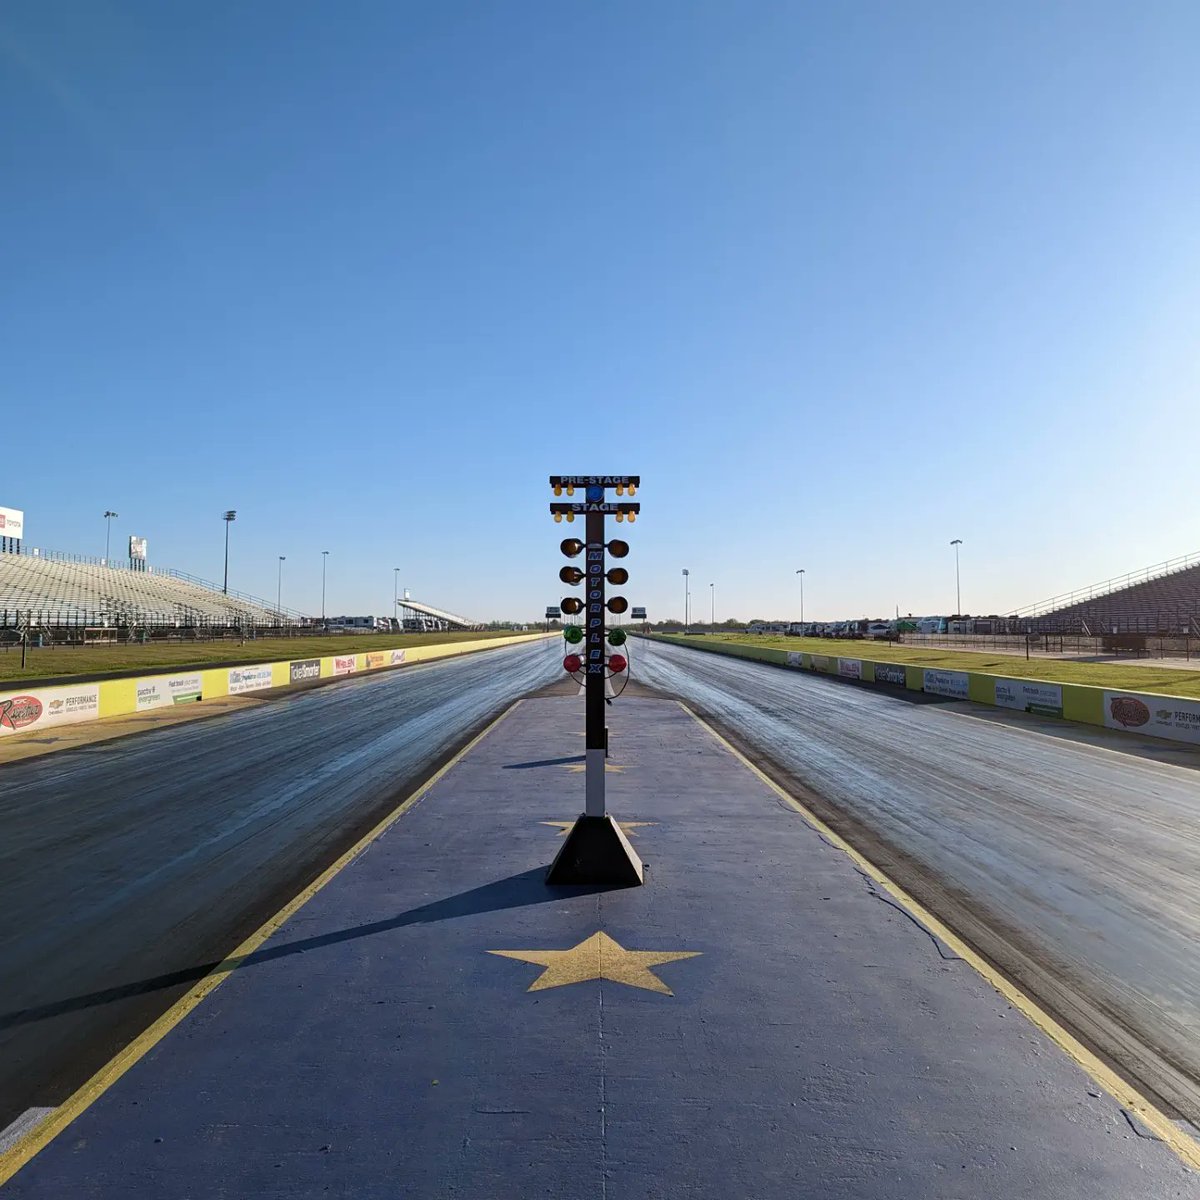 Cold mornings at a racetrack just hit different. 

#racing #texasmotorplex #dragracing #funnycarchaos #TheClutchDump